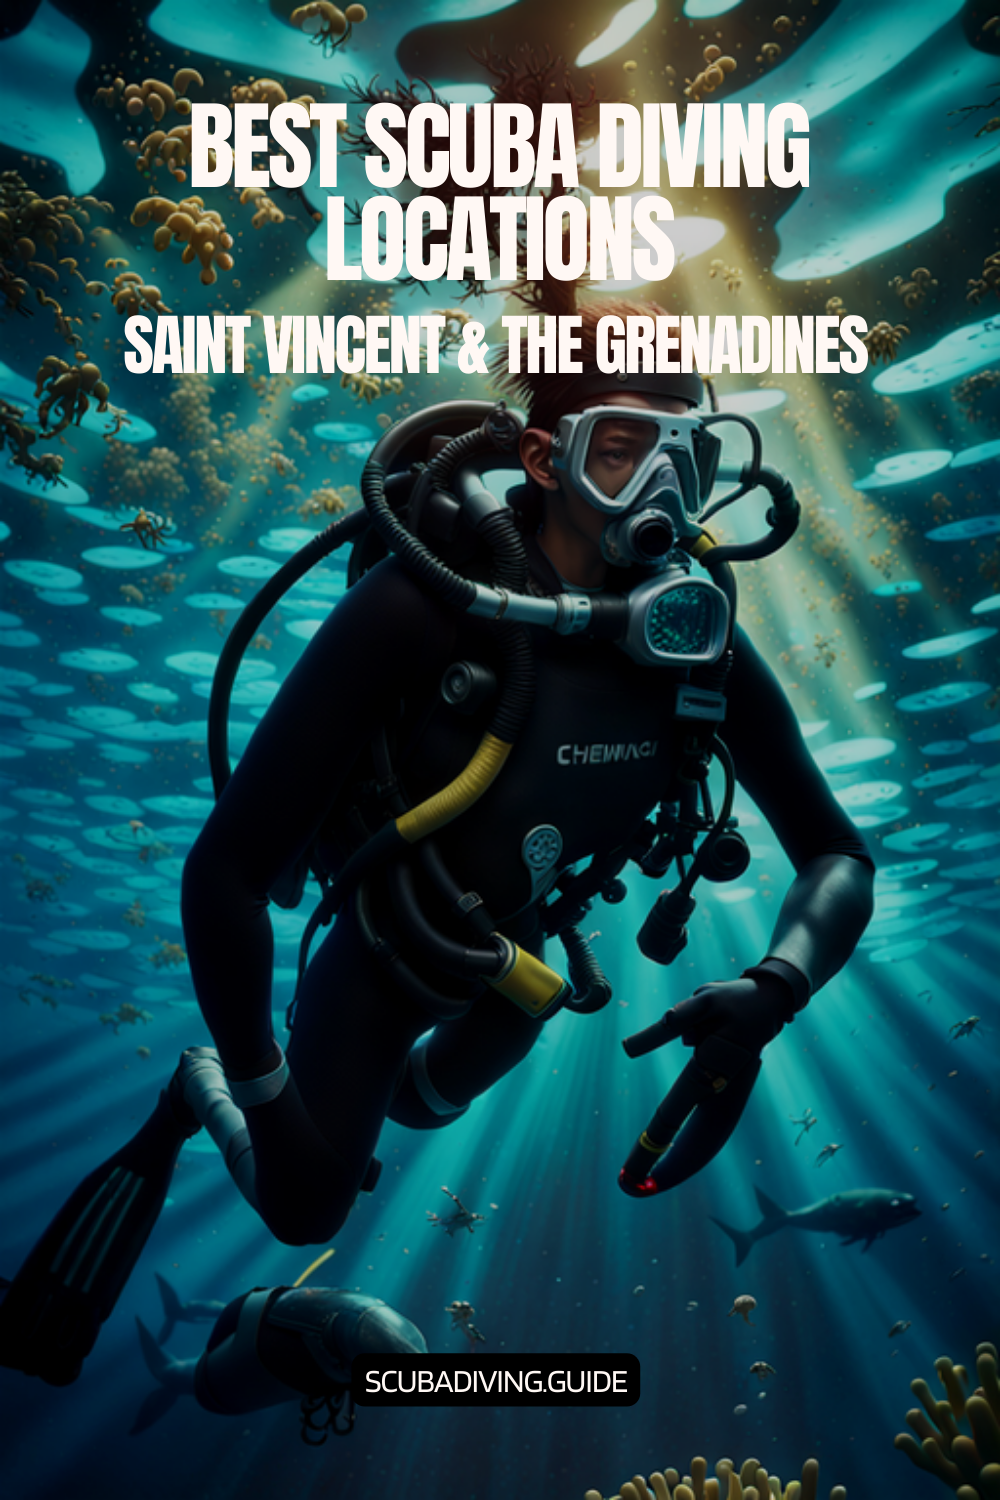 Scuba Diving Locations in Saint Vincent & The Grenadines